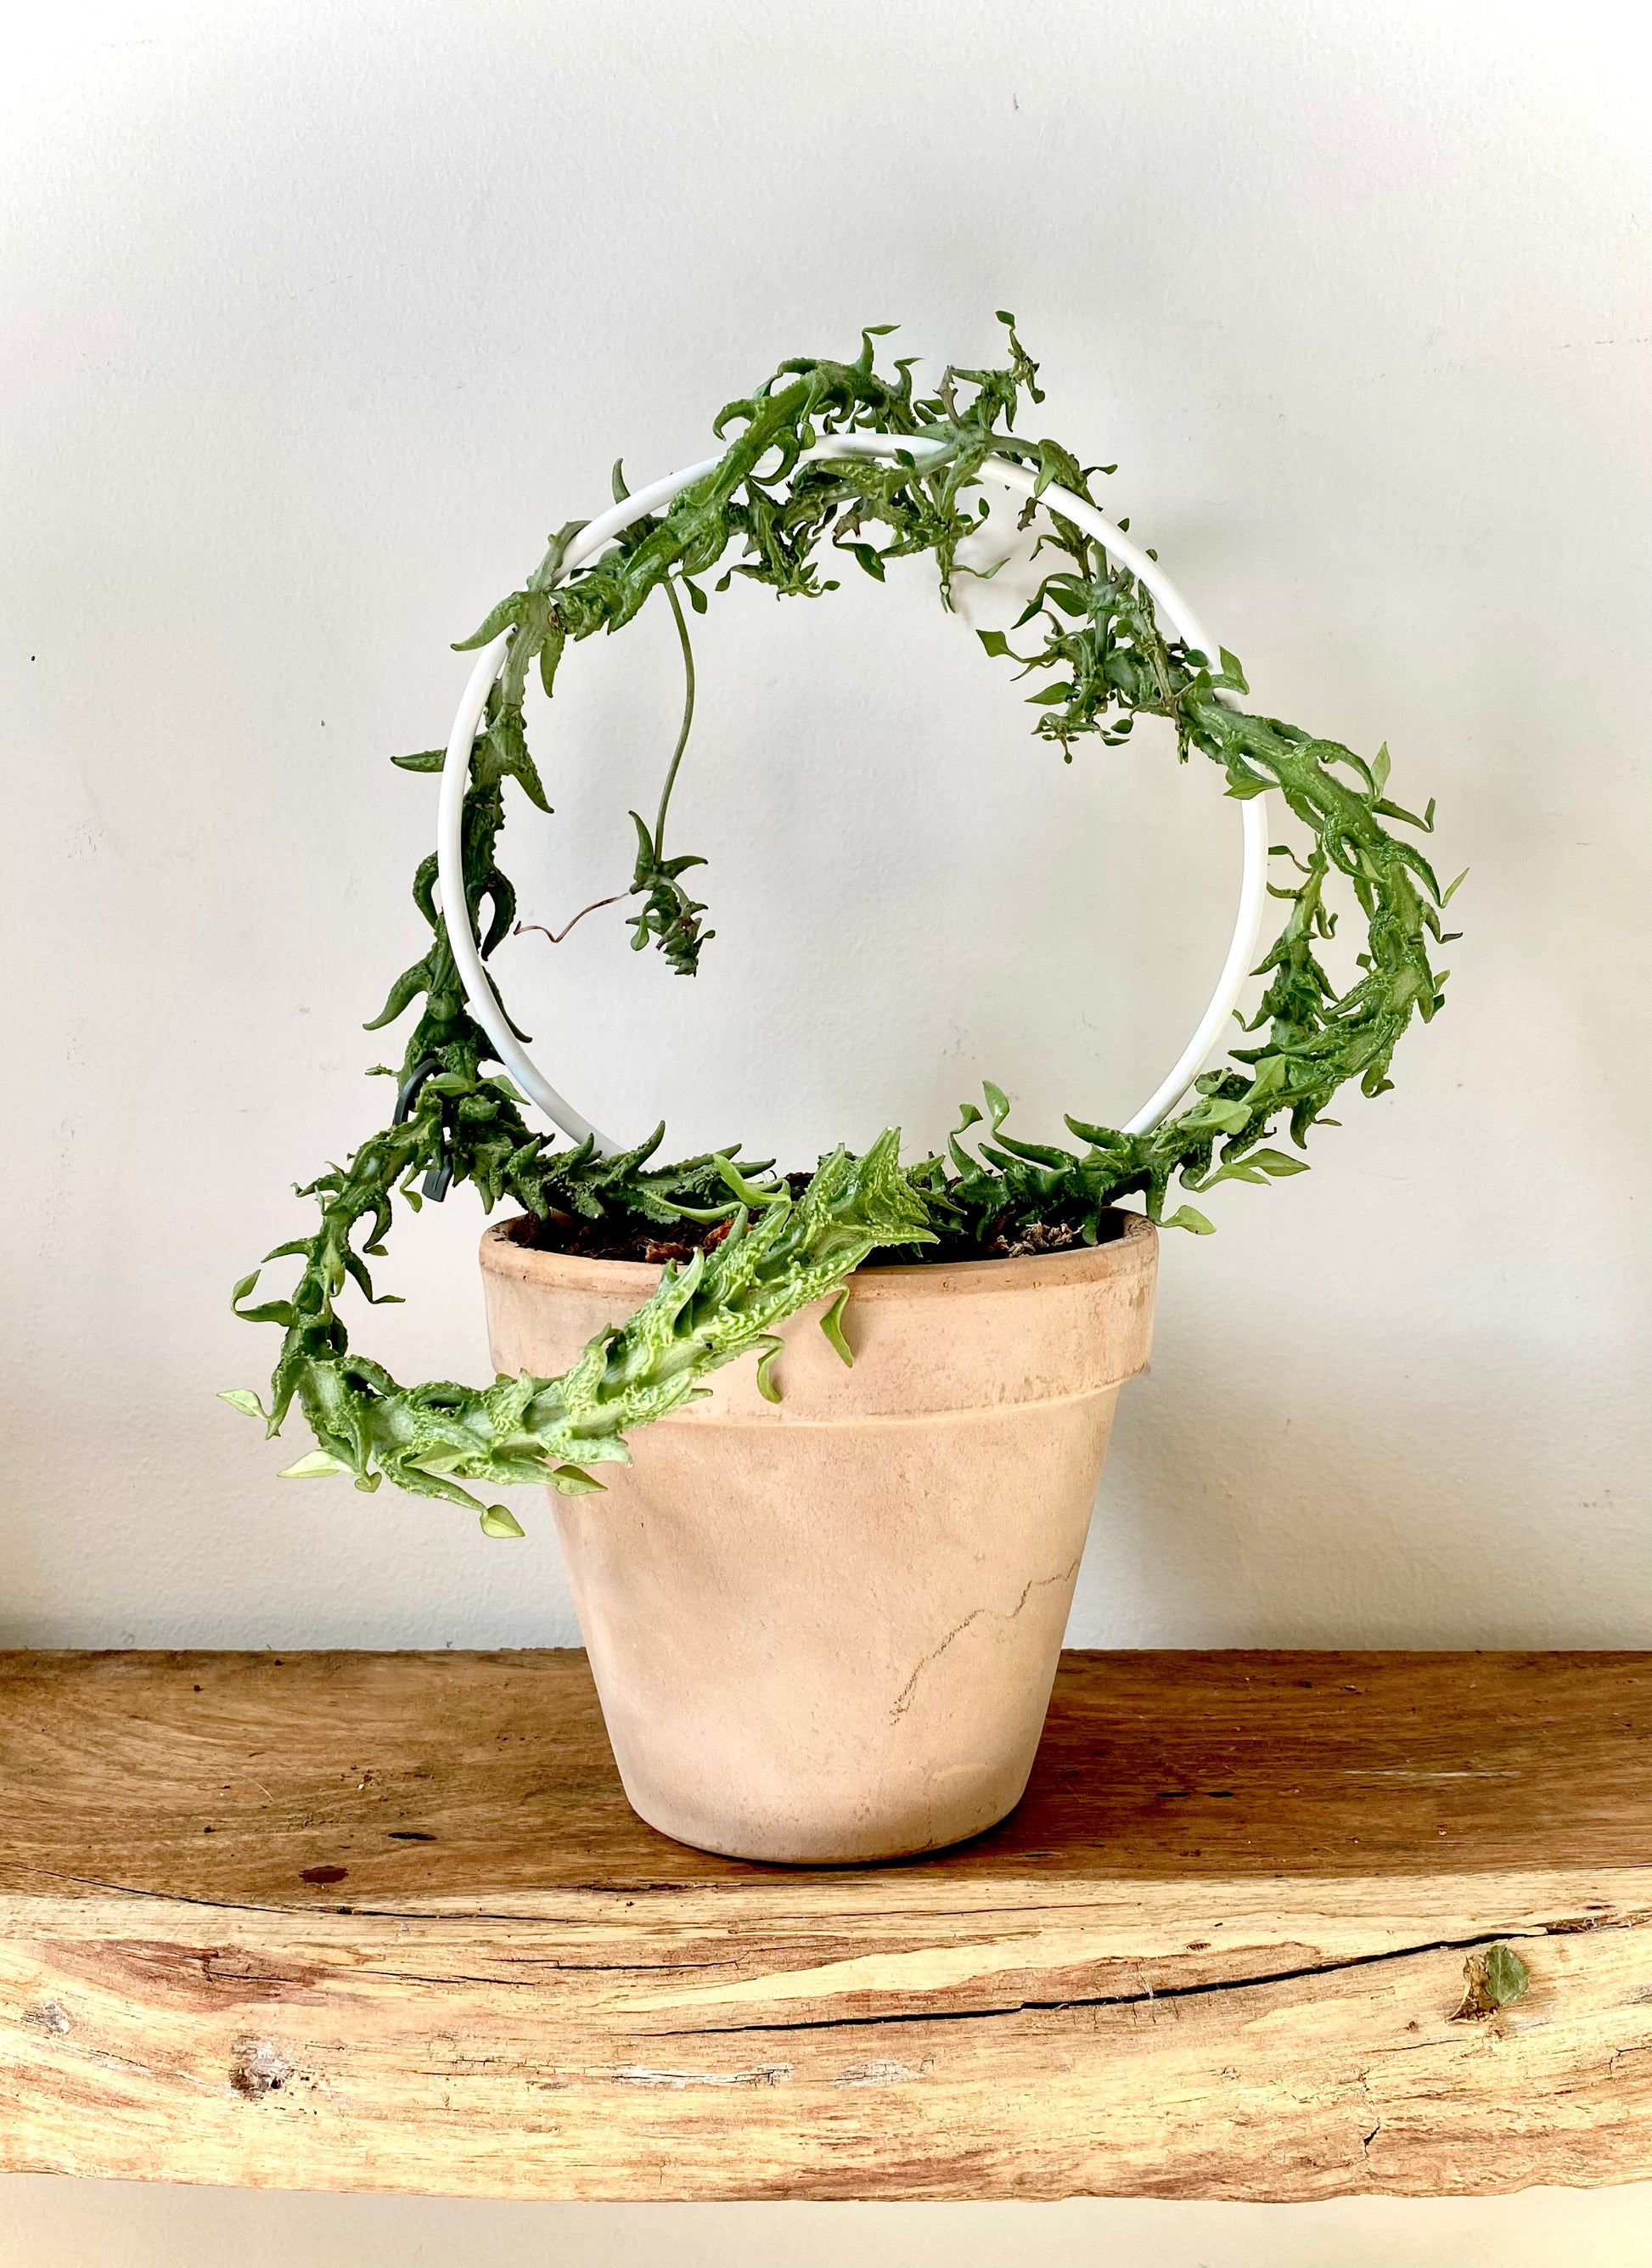 A White Mini Round plant trellis with a thick green succulent growing around it in a grey terracotta plant pot on a wooden shelf